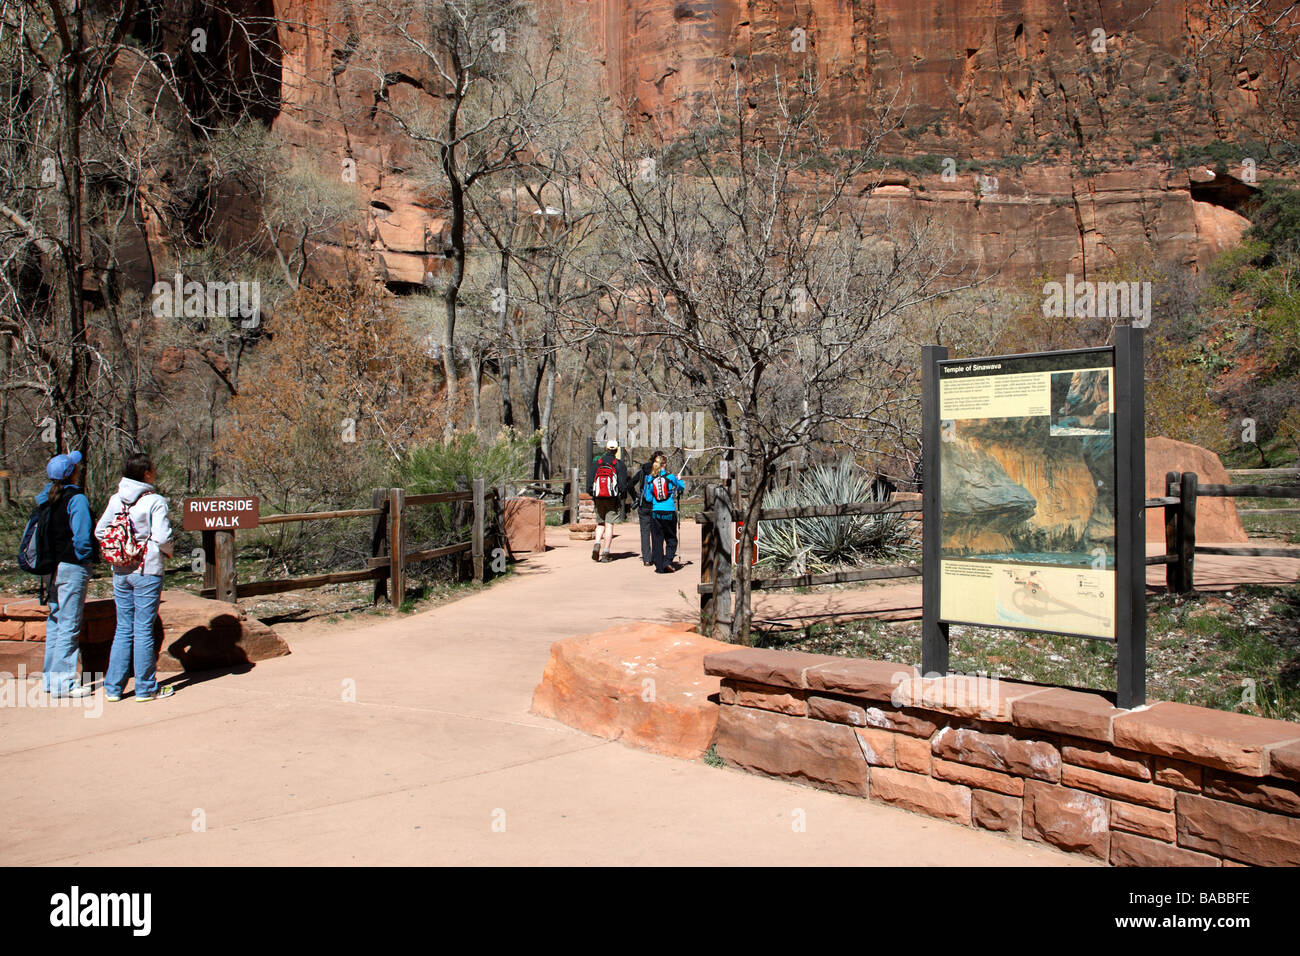 information boards at the start of the riverside walk temple of sinawava zion canyon national park utah usa Stock Photo